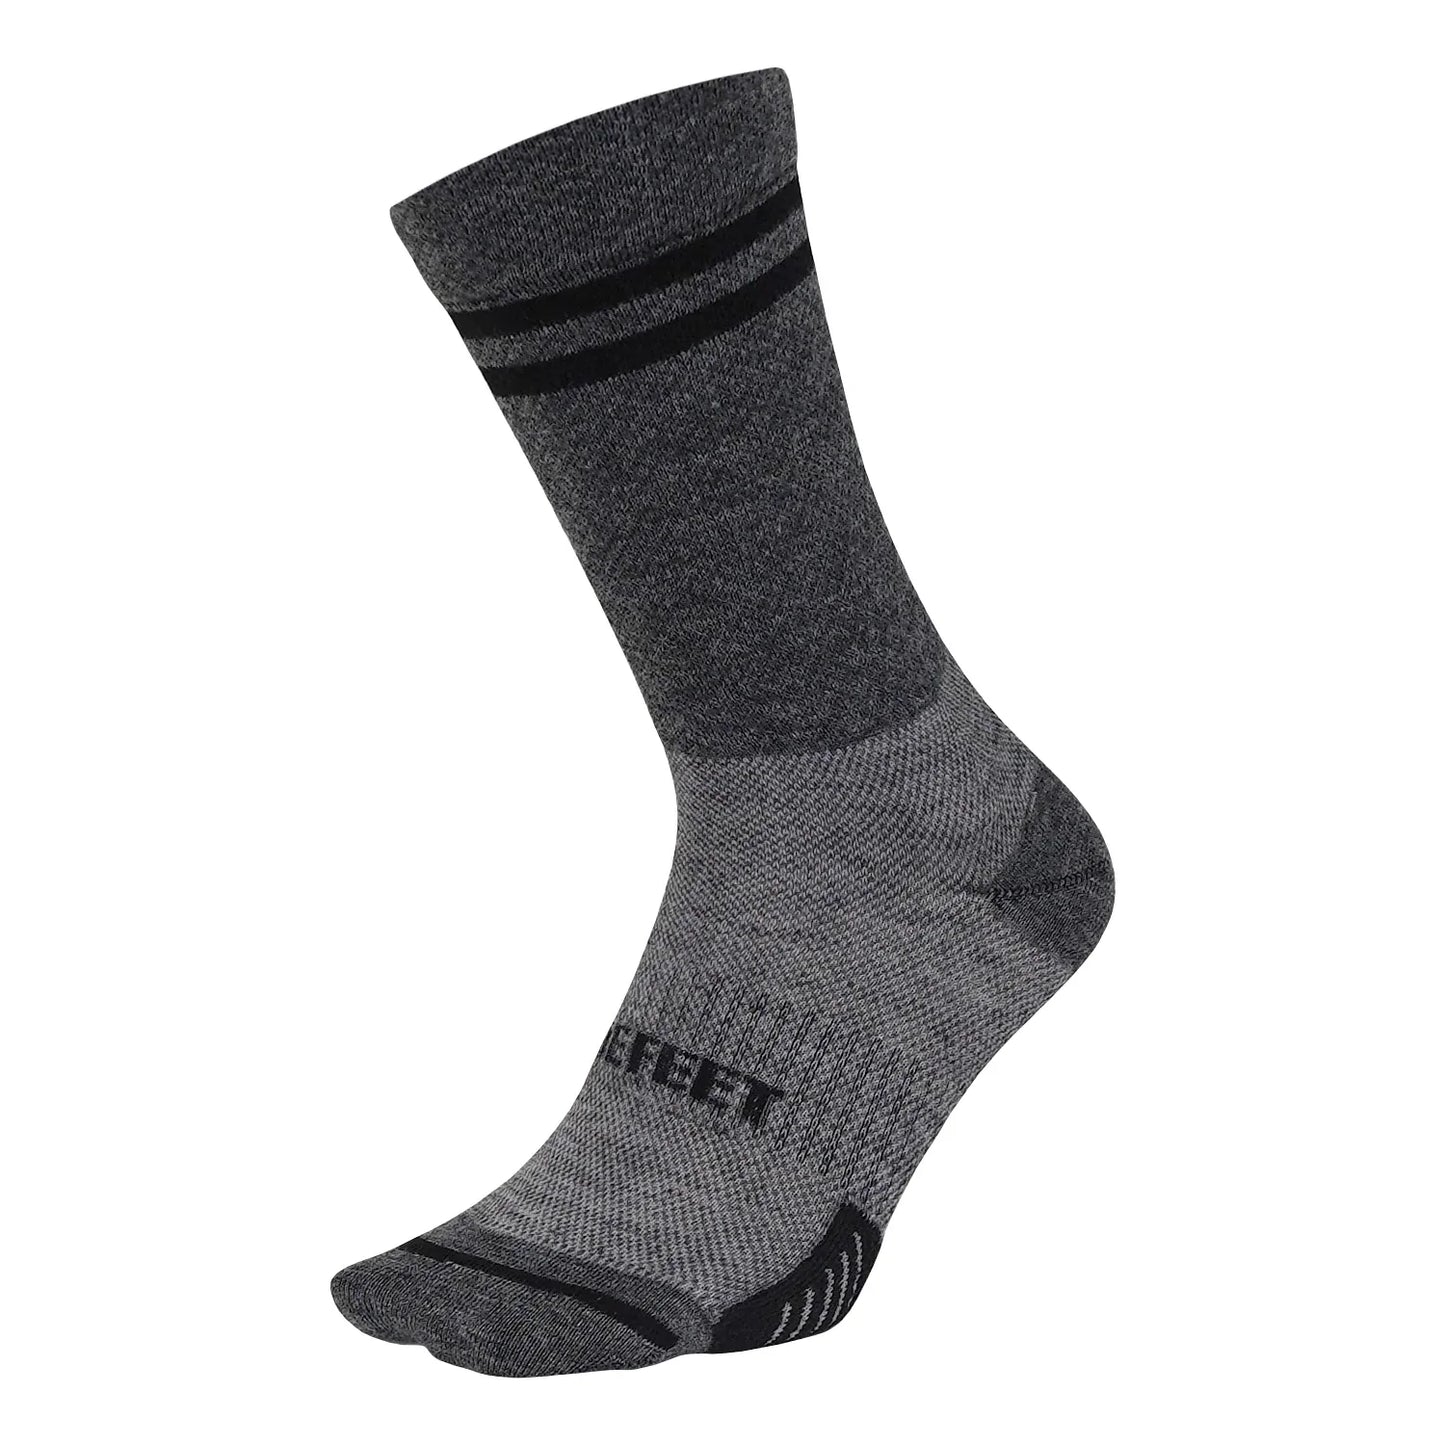 merino wool blend DeFeet cycling sock in dark grey with a double black stripe on the cuff